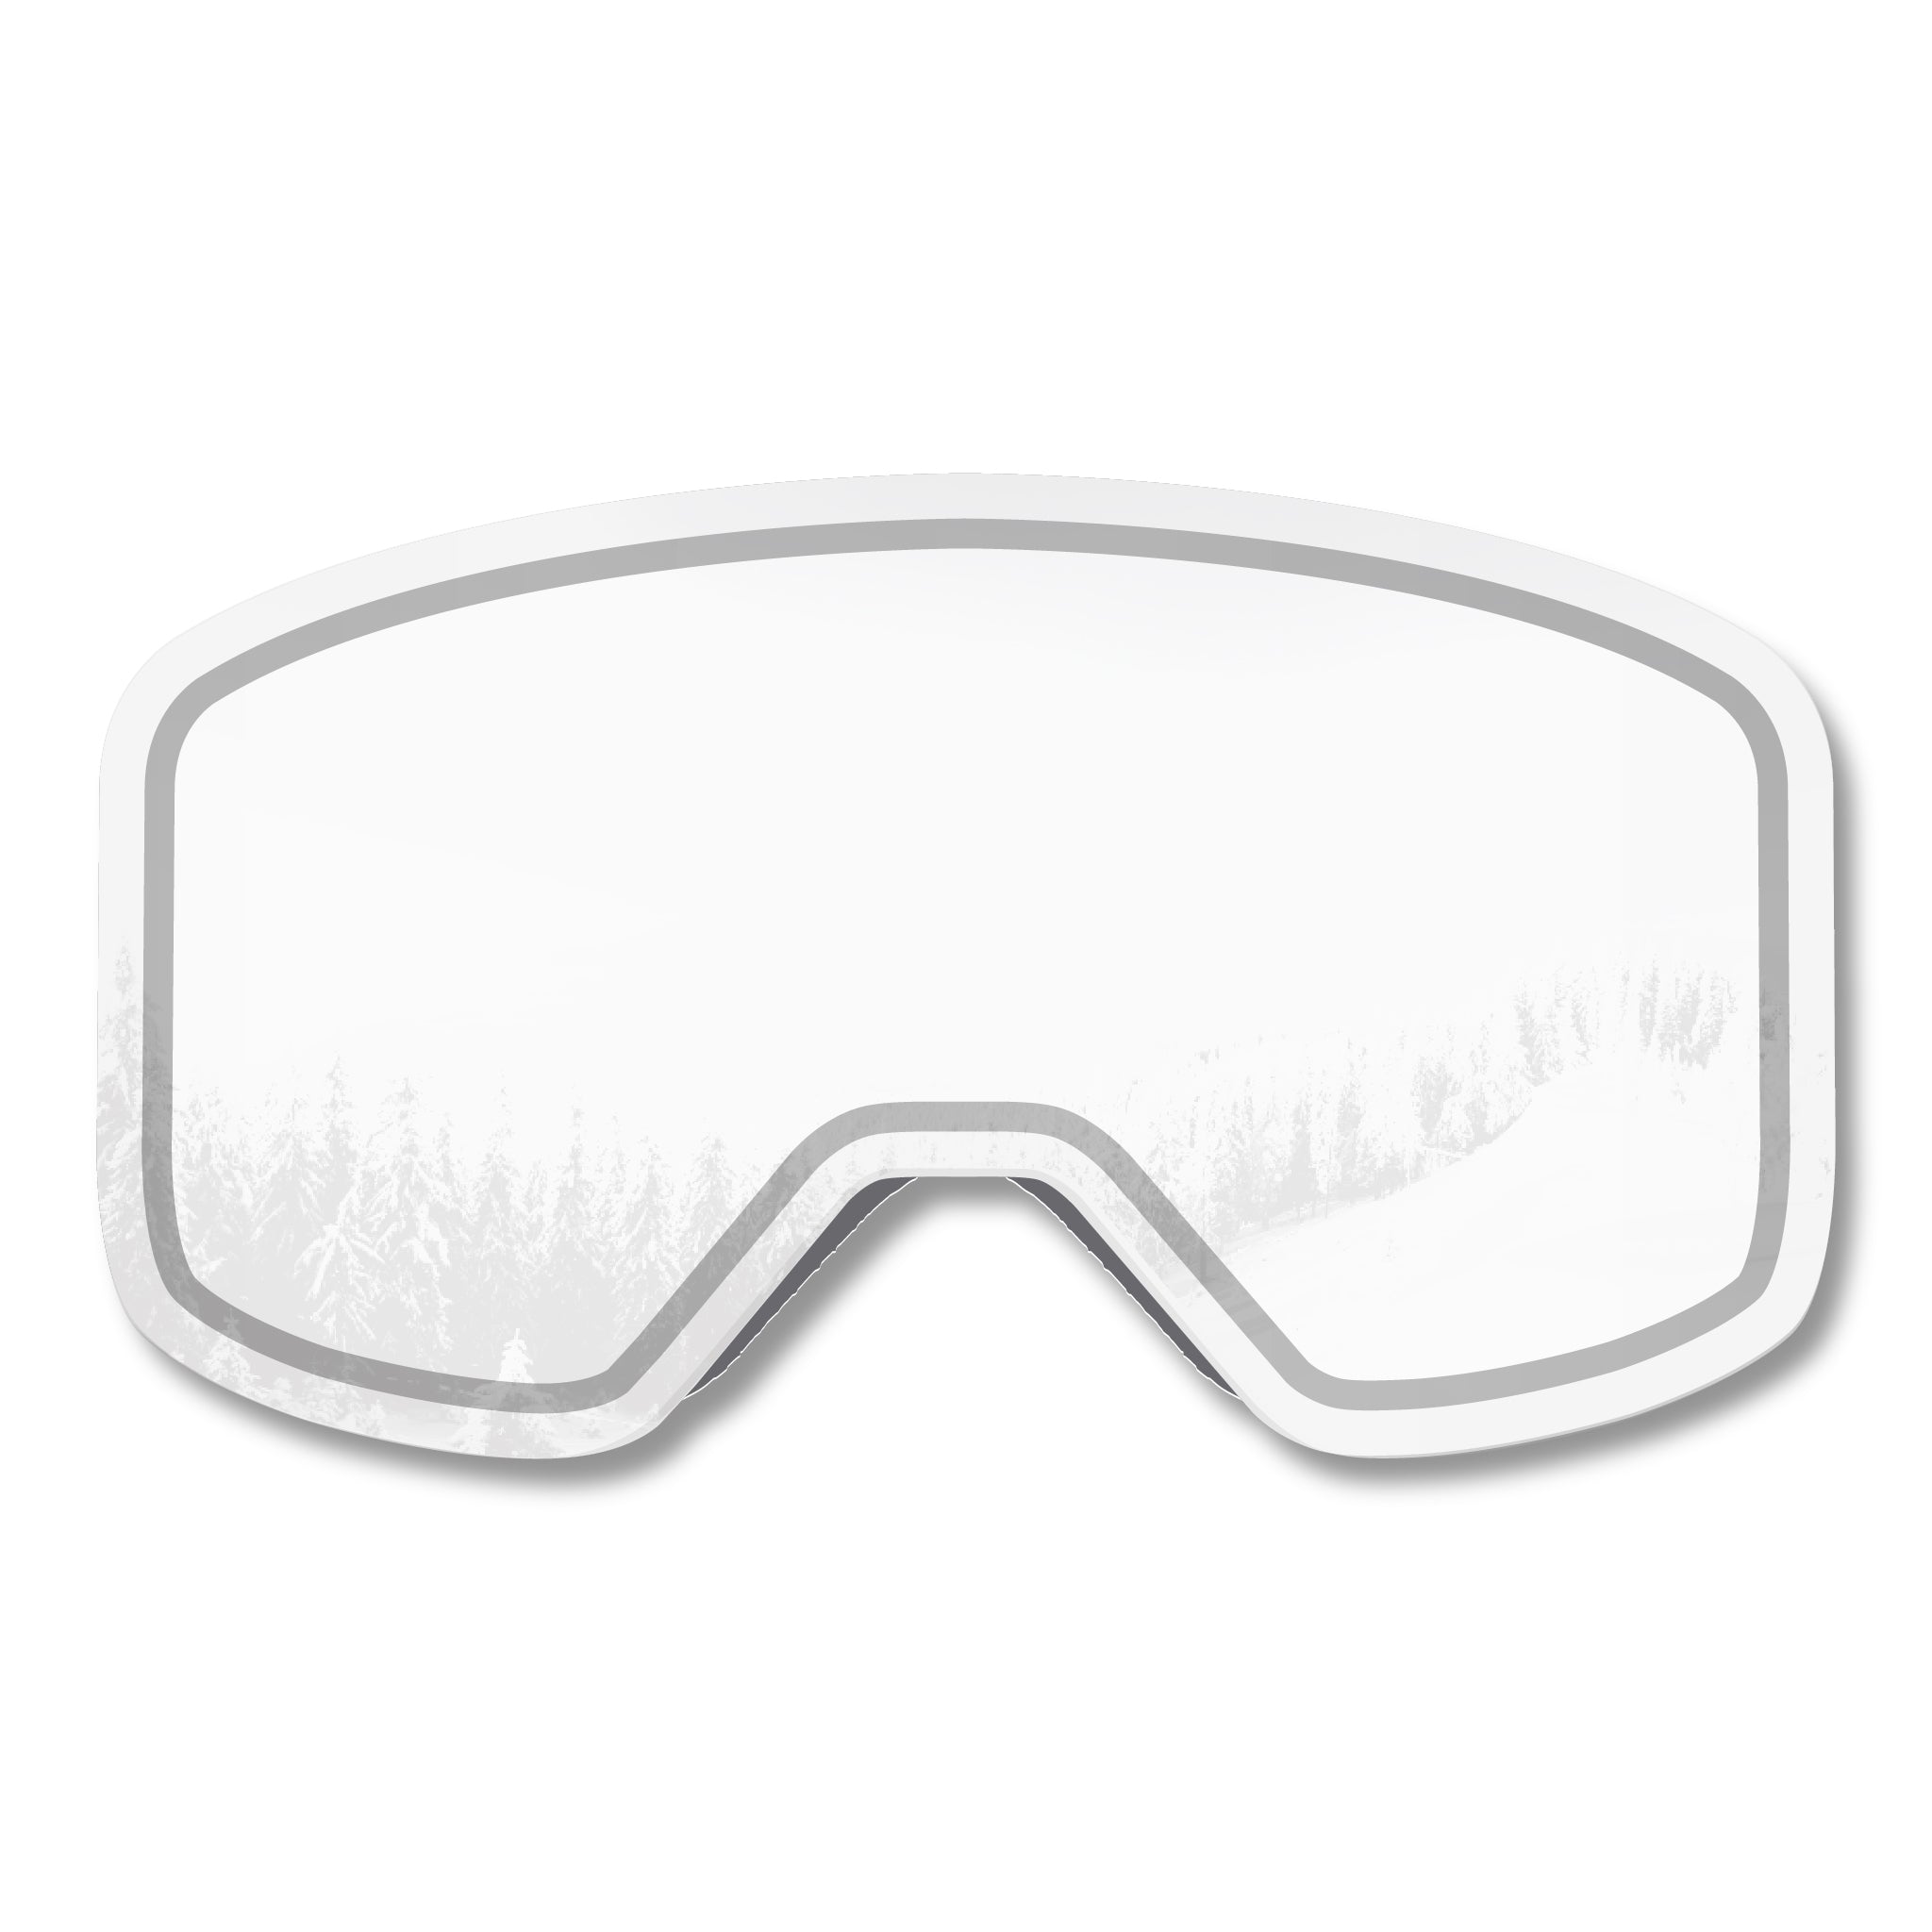 Product shot of the STAGE Propnetic Magnetic Ski Goggle Clear Lens. The lens showcases a minor reflection of trees on a ski hill. This clear lens is perfect for all-condition skiing including cloudy, stormy, and night skiing.